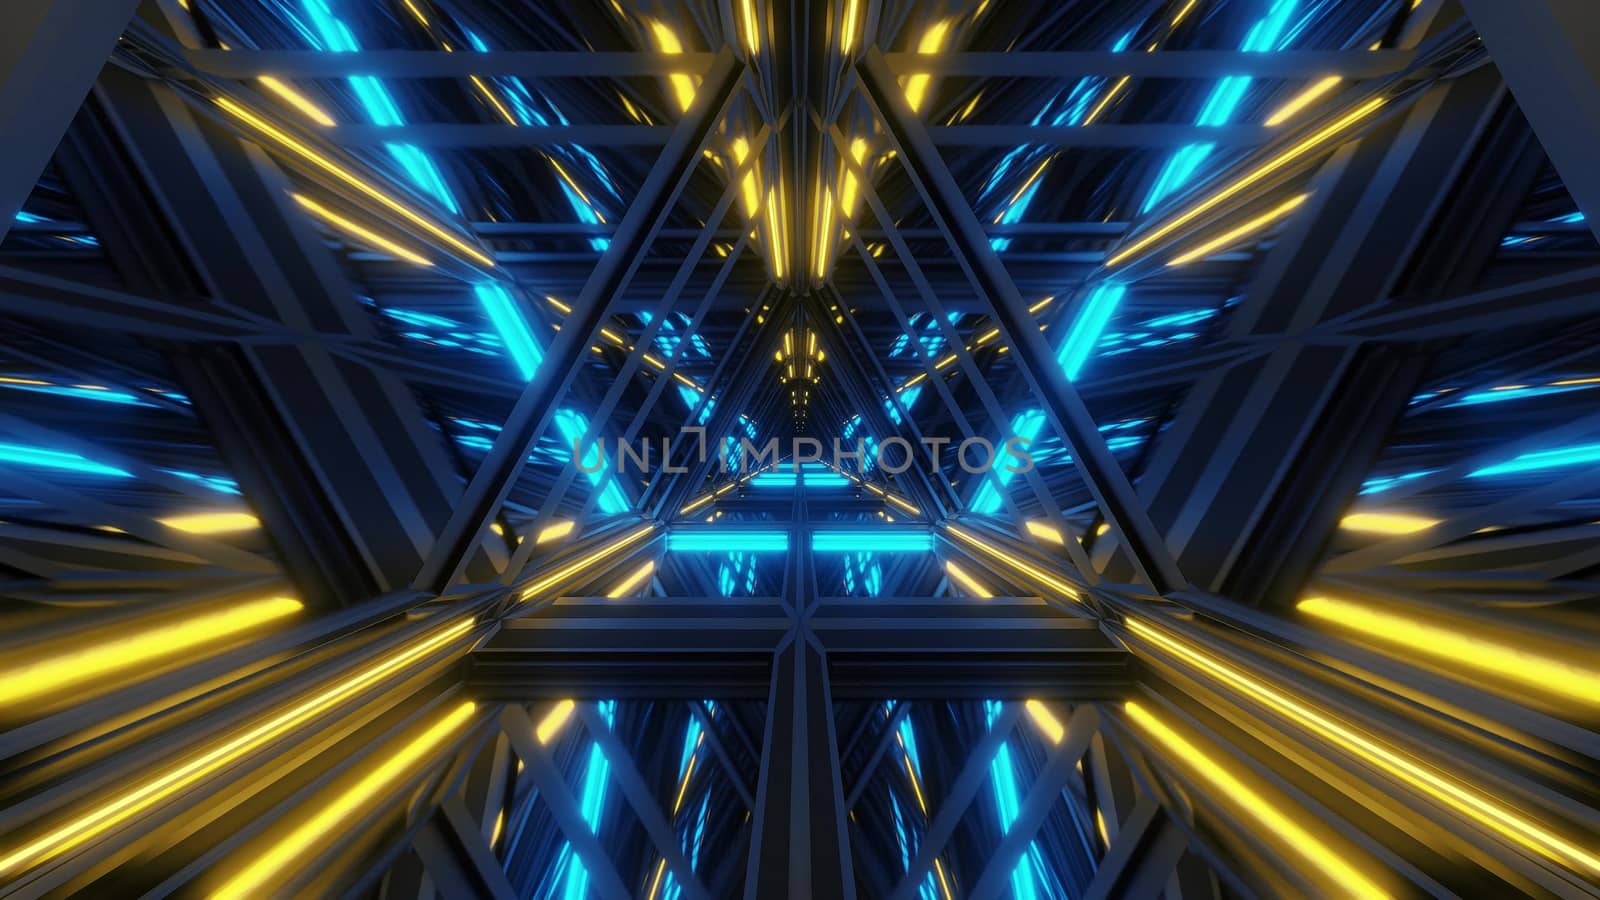 endless triangle design glass tunnel corridor with glass windows and bottom and gowing lights 3d illustration background wallpaper, futuristoic glass architecture 3d rendering artwork